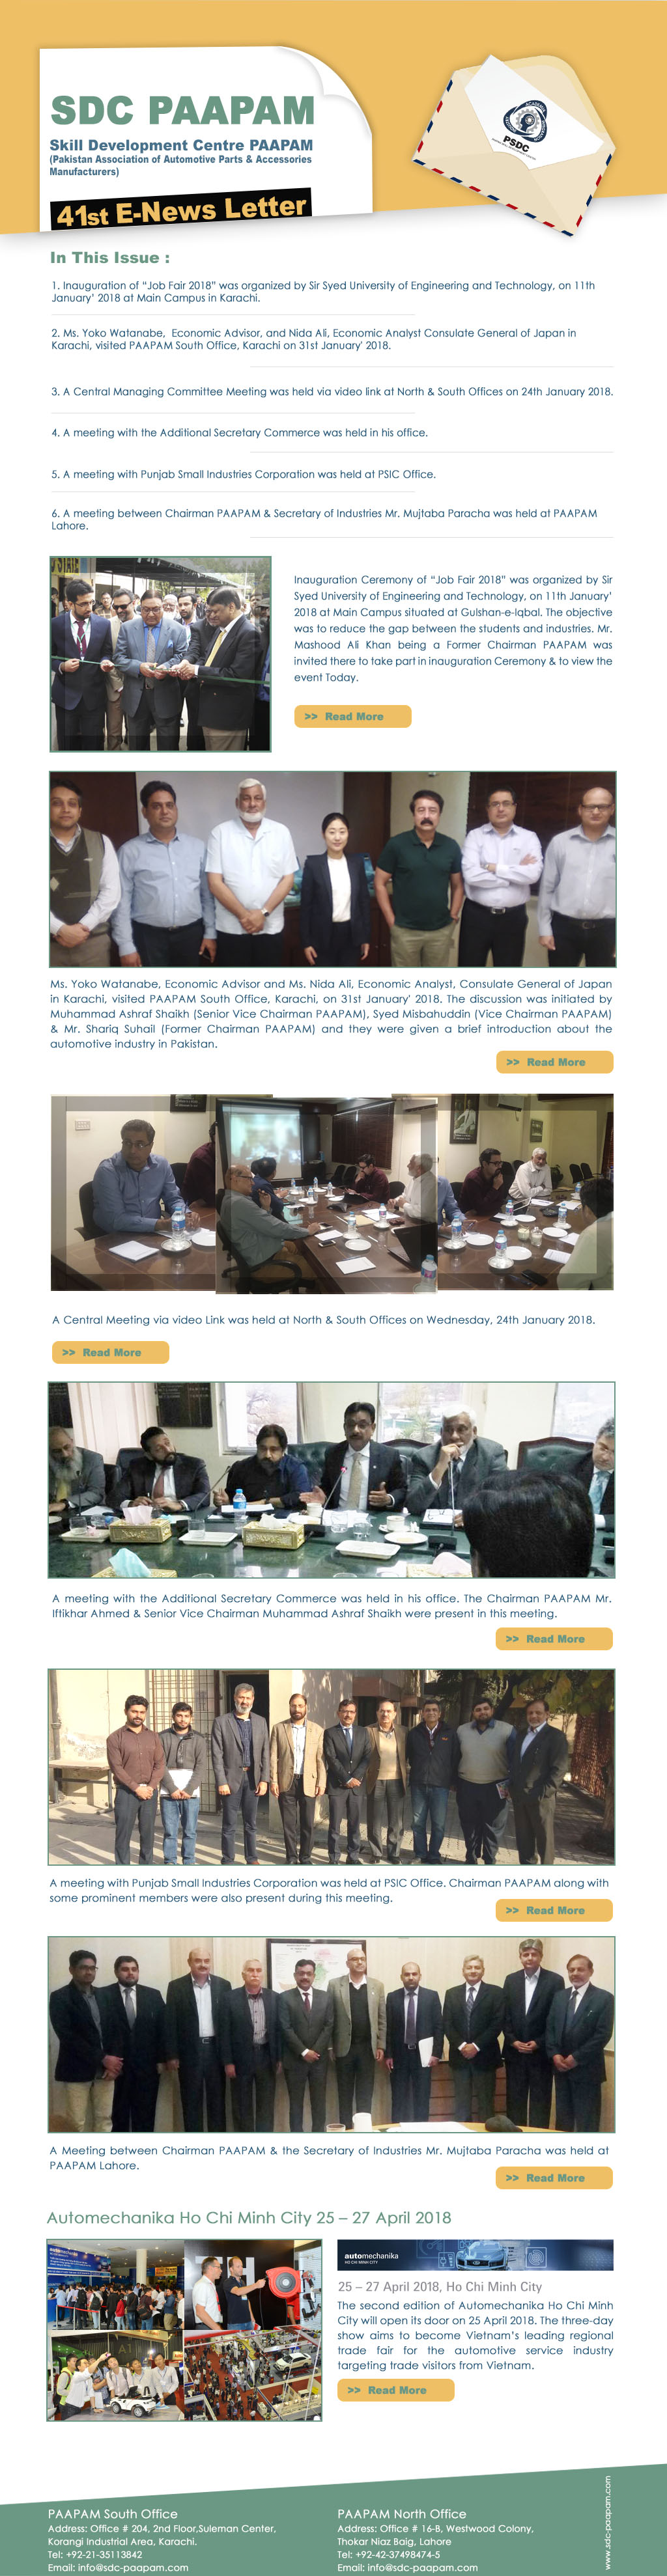 SDC PAAPAM eNewsletter, Issue 41